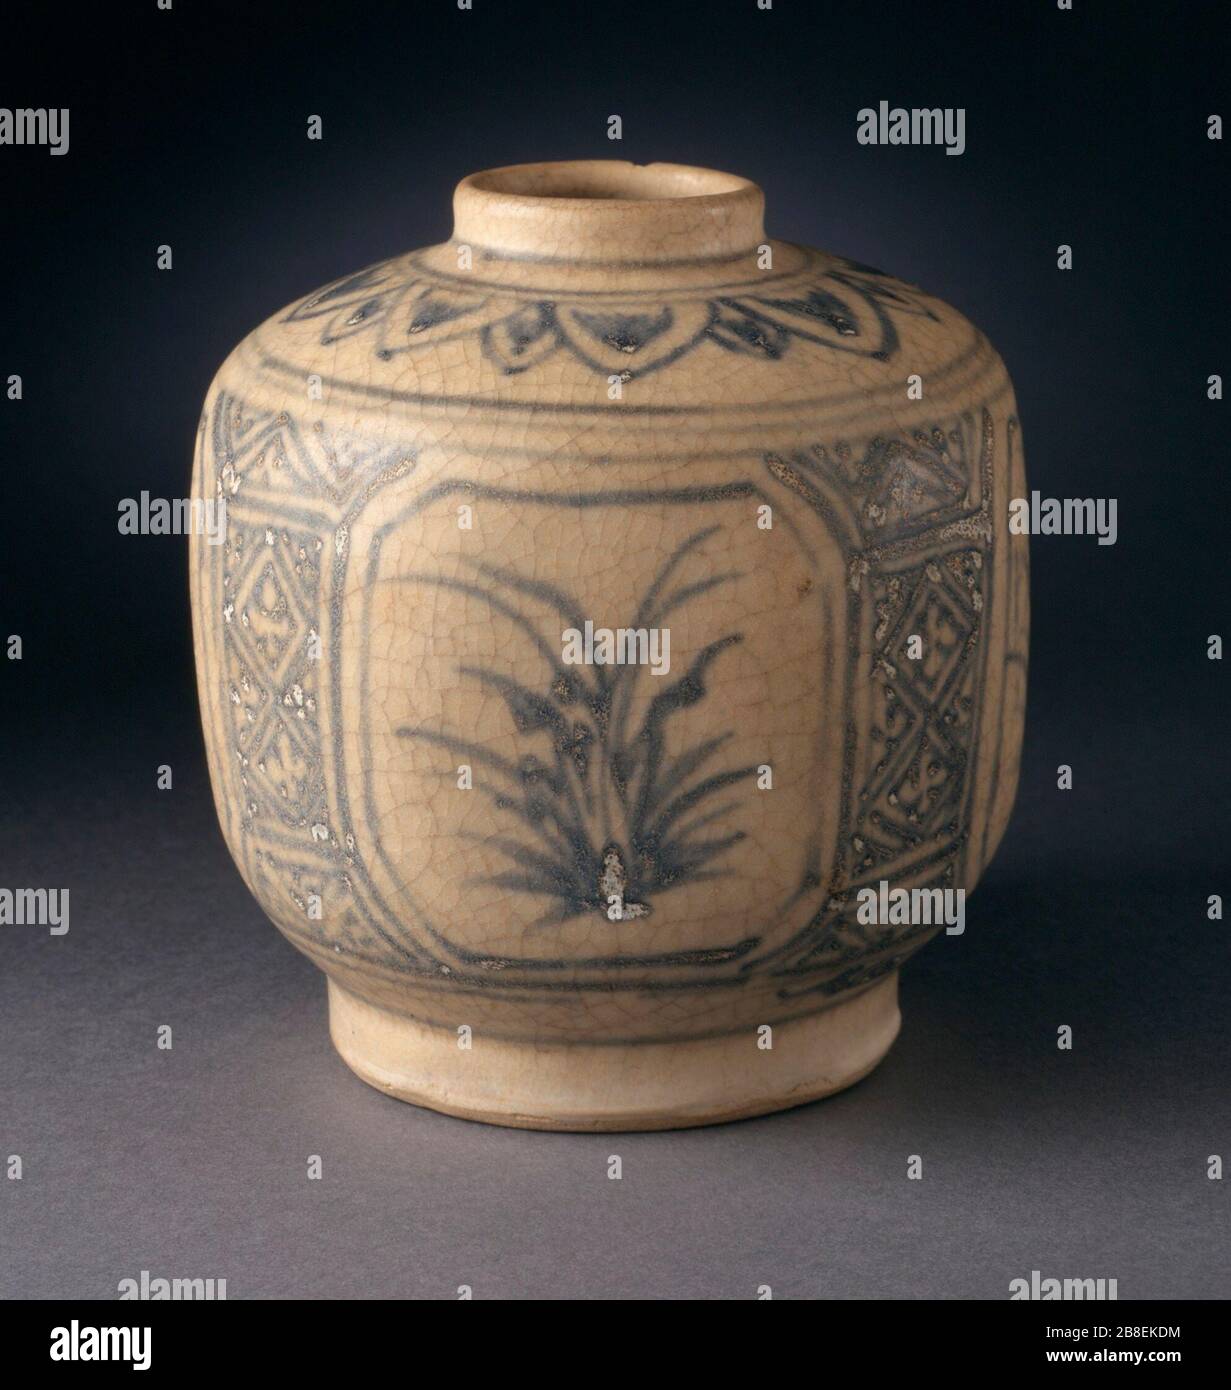 'Faceted Jar with Vegetal Sprays and Floral Petals; English:  Vietnam, 1450-1550 Furnishings; Serviceware Wheel-thrown stoneware with cream slip, underglaze blue painted decoration, and clear glaze Gift of Ambassador and Mrs. Edward E. Masters (M.84.213.239) South and Southeast Asian Art; between 1450 and 1550 date QS:P571,+1500-00-00T00:00:00Z/6,P1319,+1450-00-00T00:00:00Z/9,P1326,+1550-00-00T00:00:00Z/9; ' Stock Photo